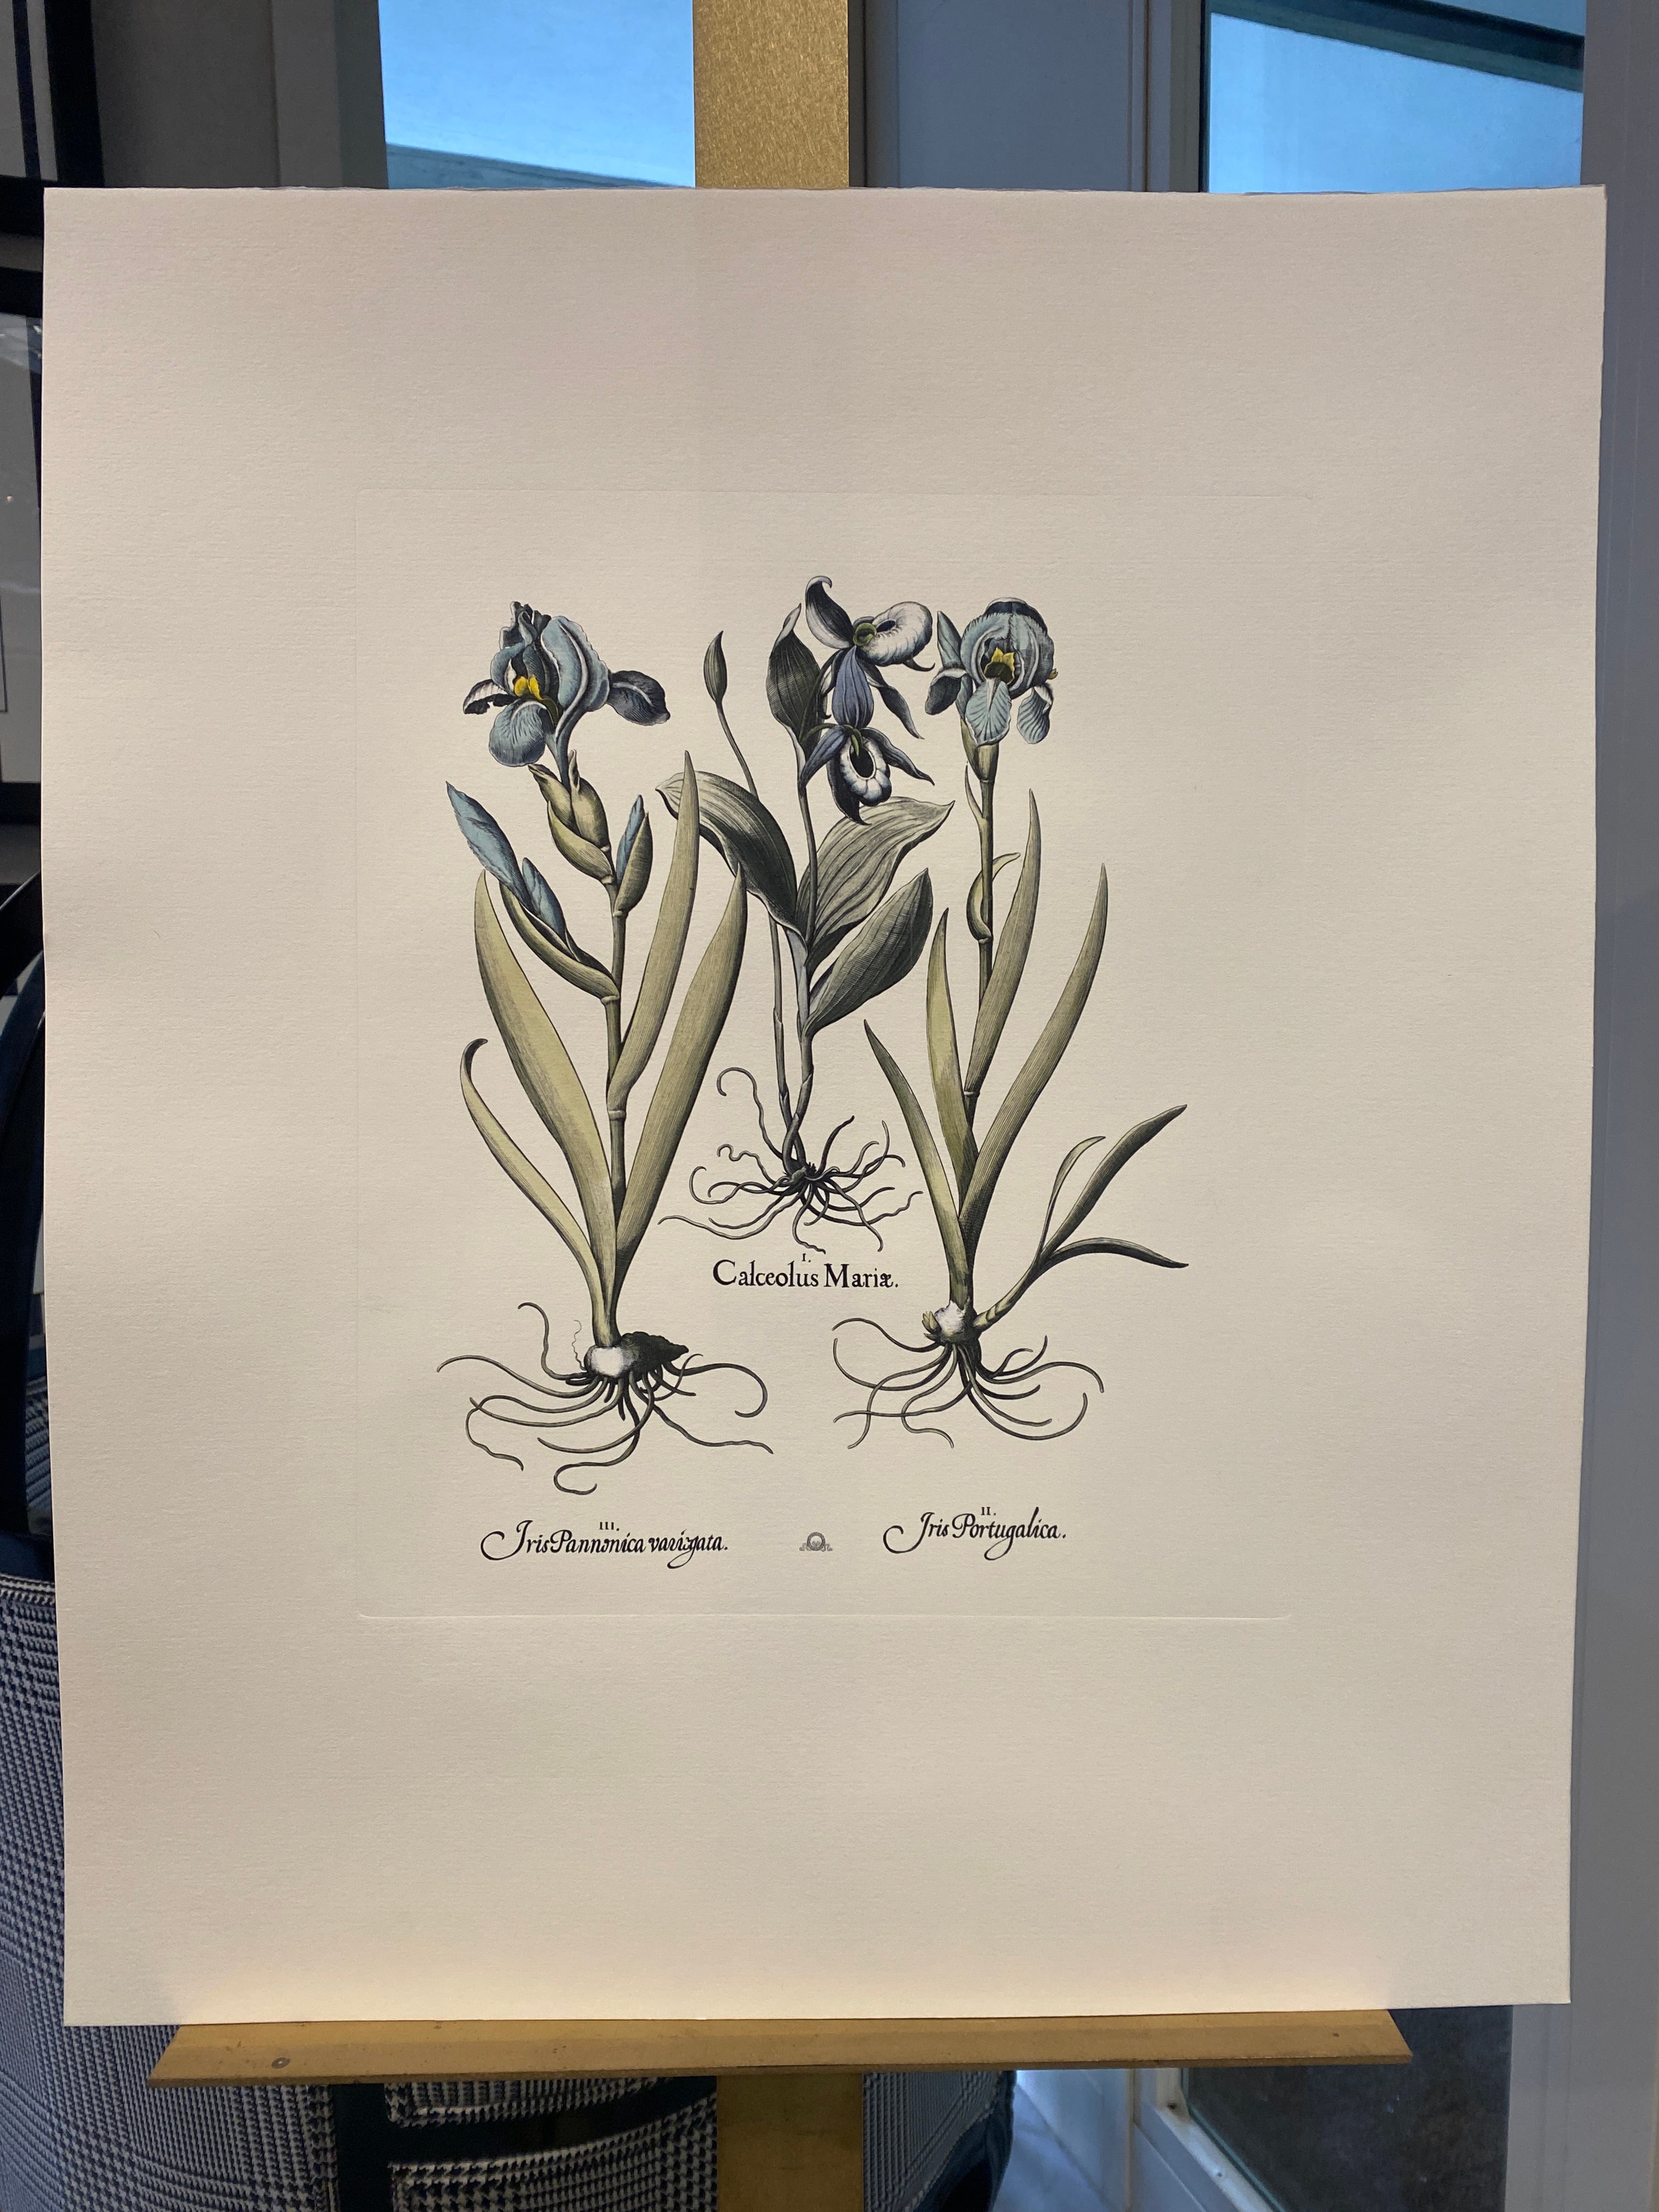 Print from the Collection Botanique Bulbacee representing Tulipa and Allium, enriched with blue colors and nuances of watercolor.

Another different Bulbacee flowers prints are available to create a colourful composition.The collection i composed